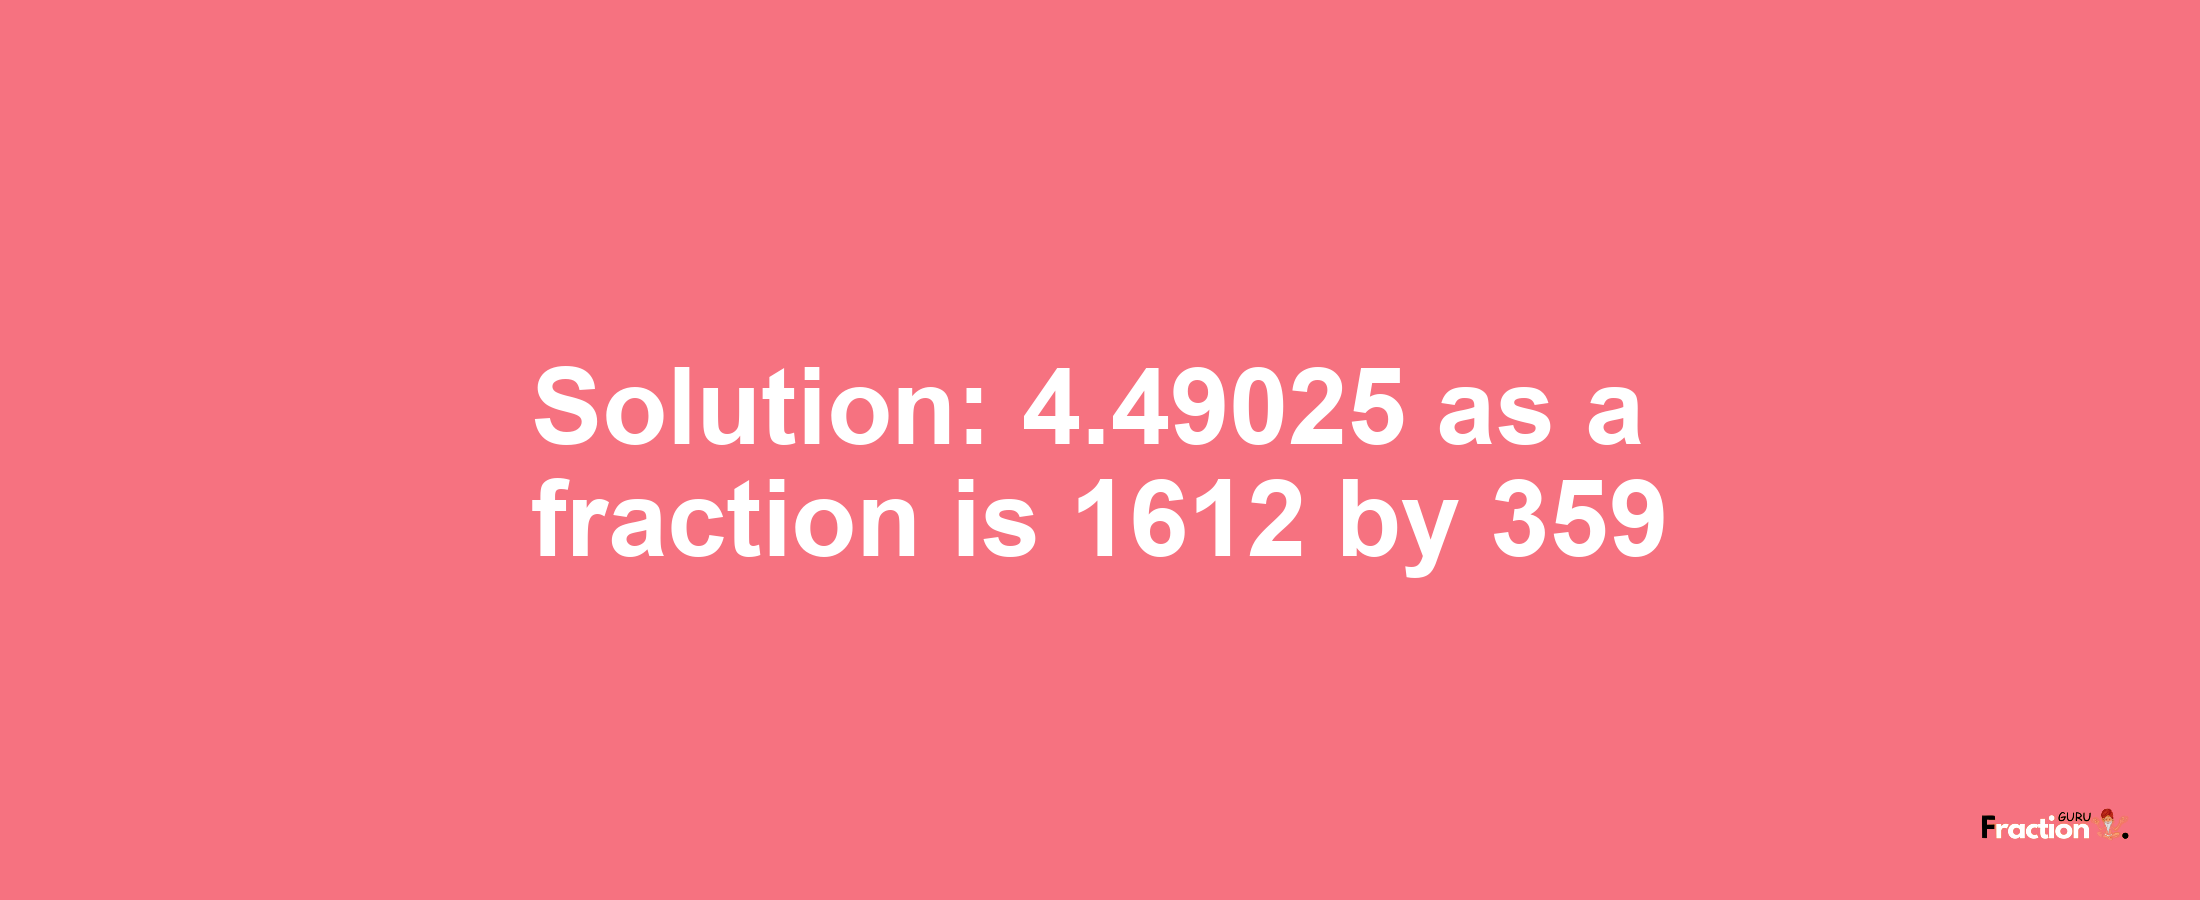 Solution:4.49025 as a fraction is 1612/359